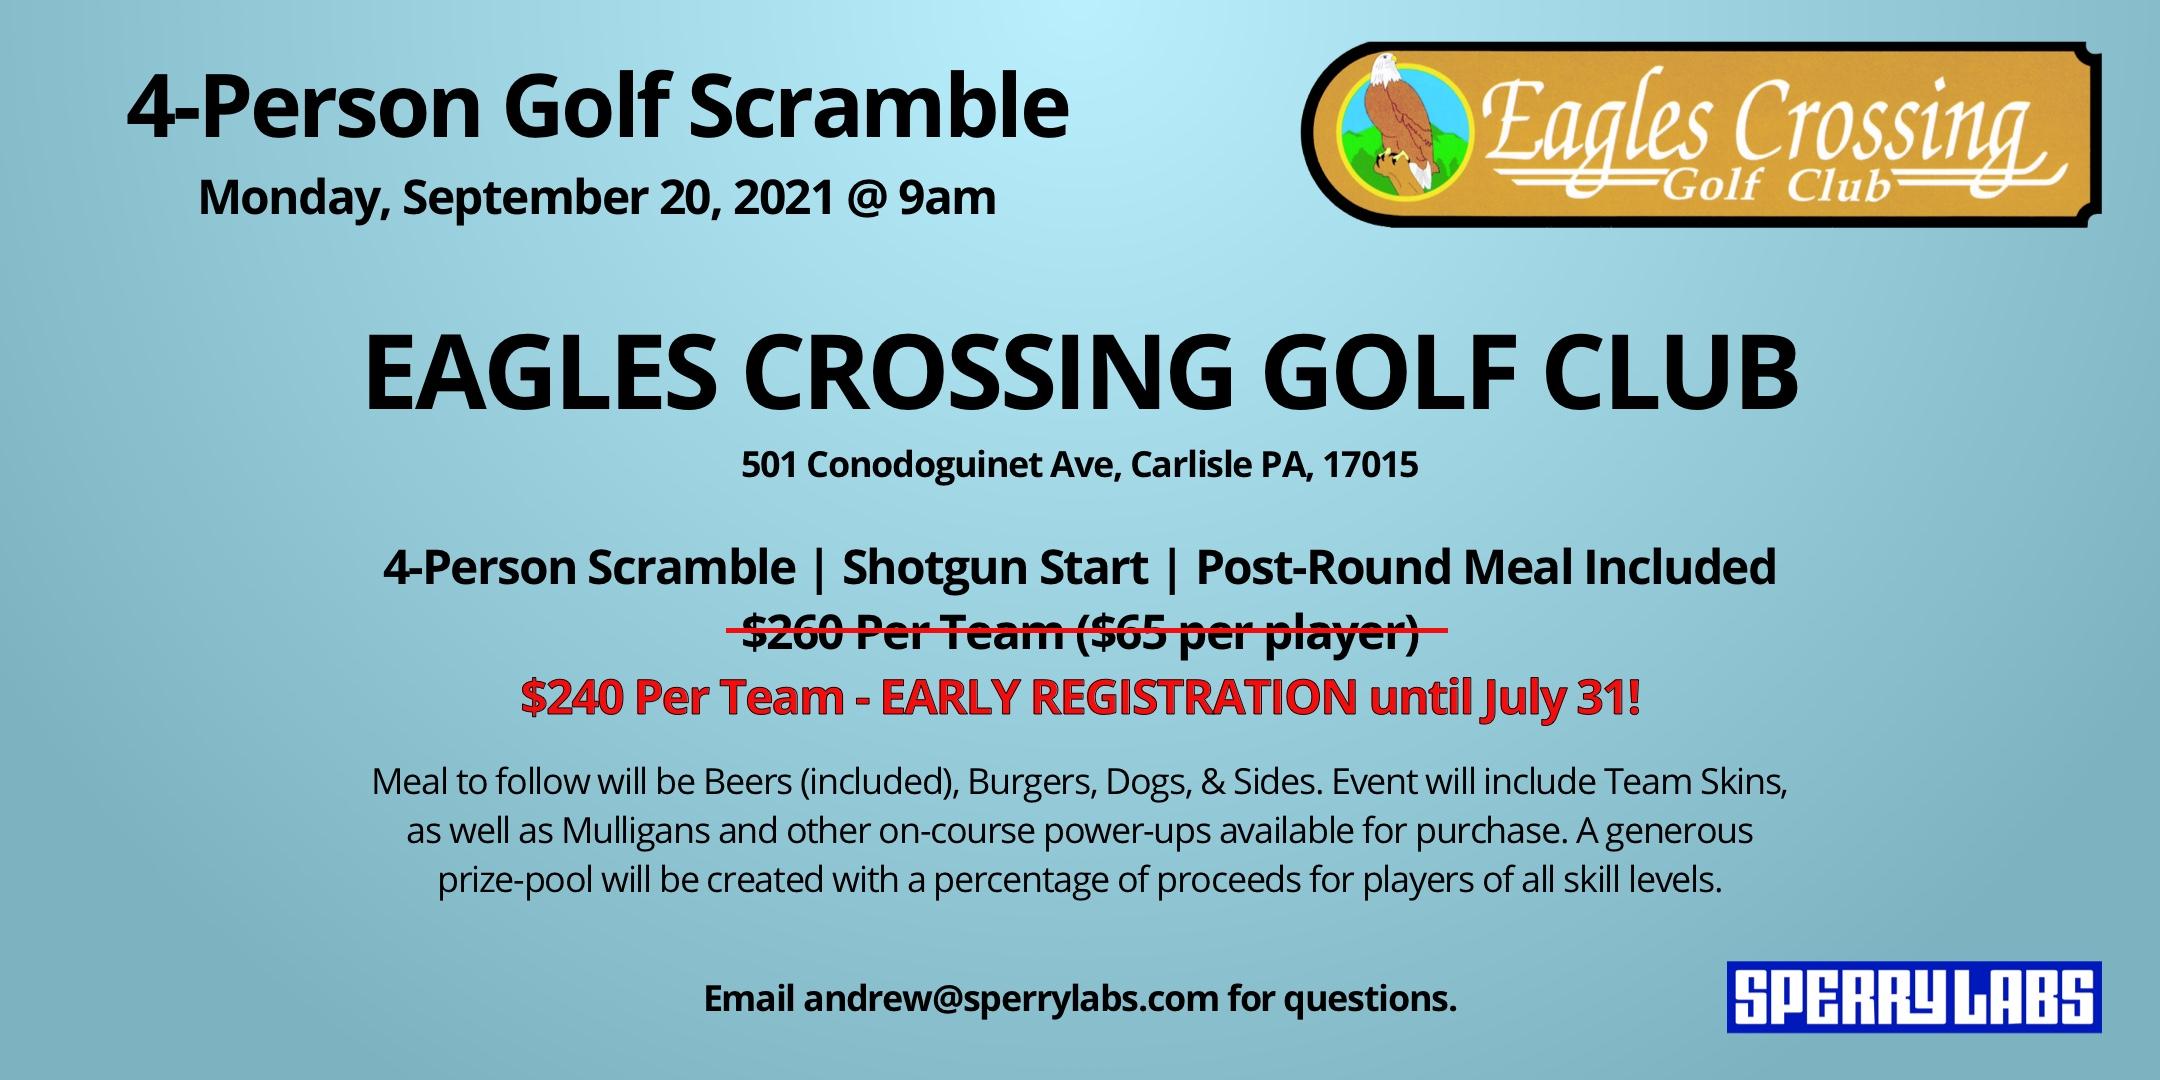 4-Person Golf Scramble at Eagles Crossing Golf Club. A Sperry Labs Tourney